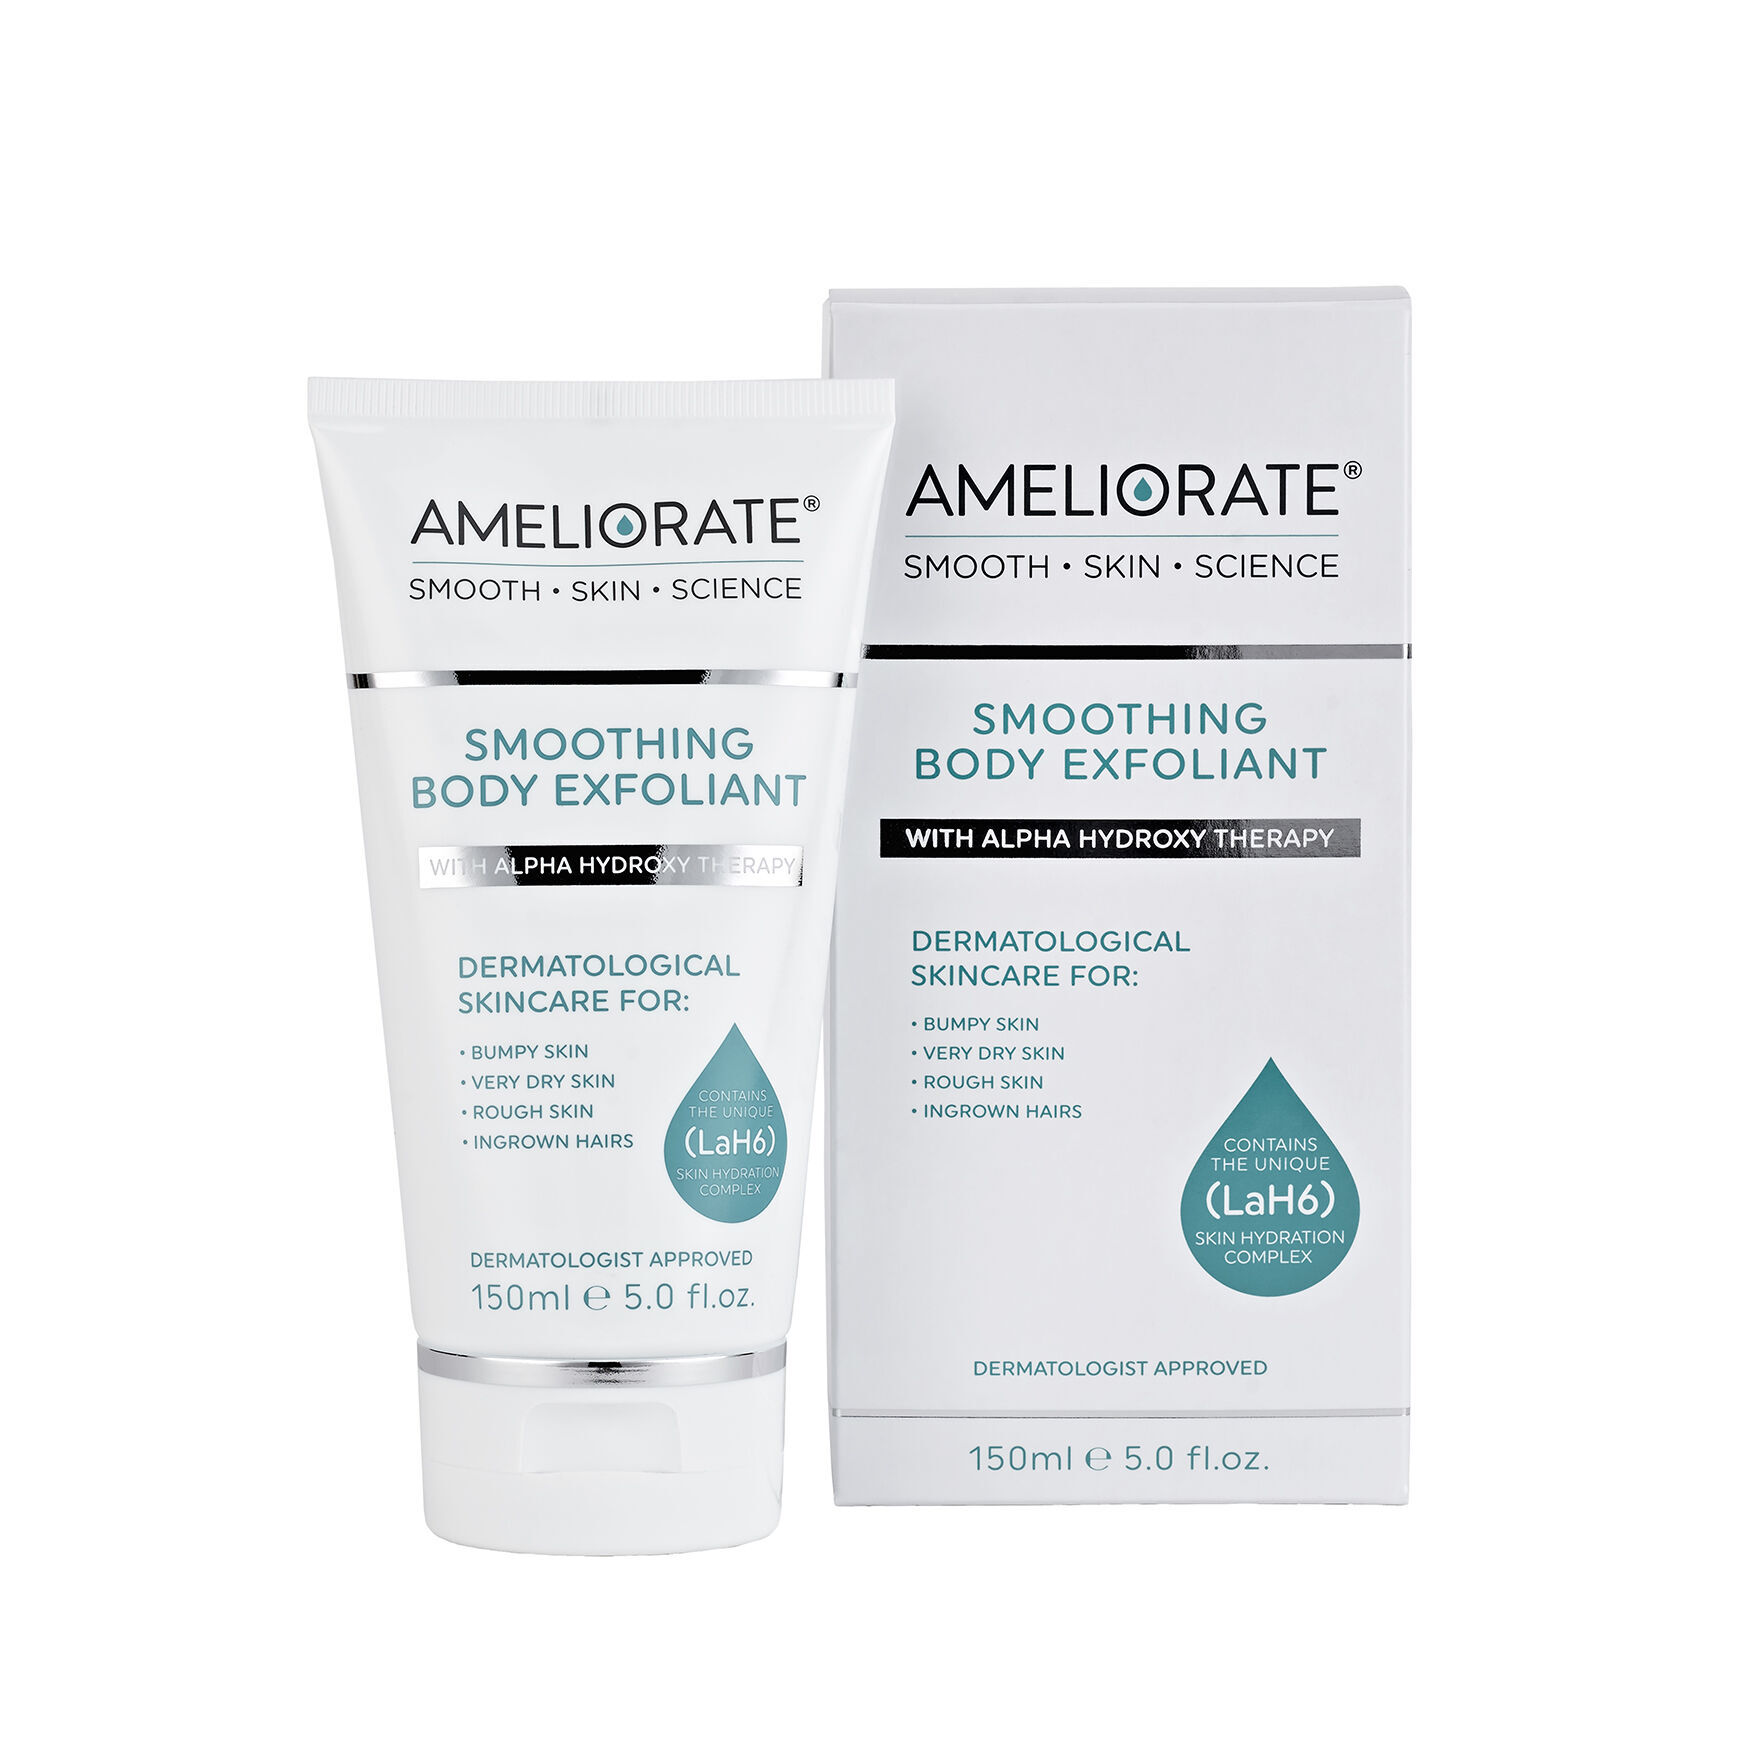 AMELIORATE - Smoothing Body Exfoliant by Ameliorate